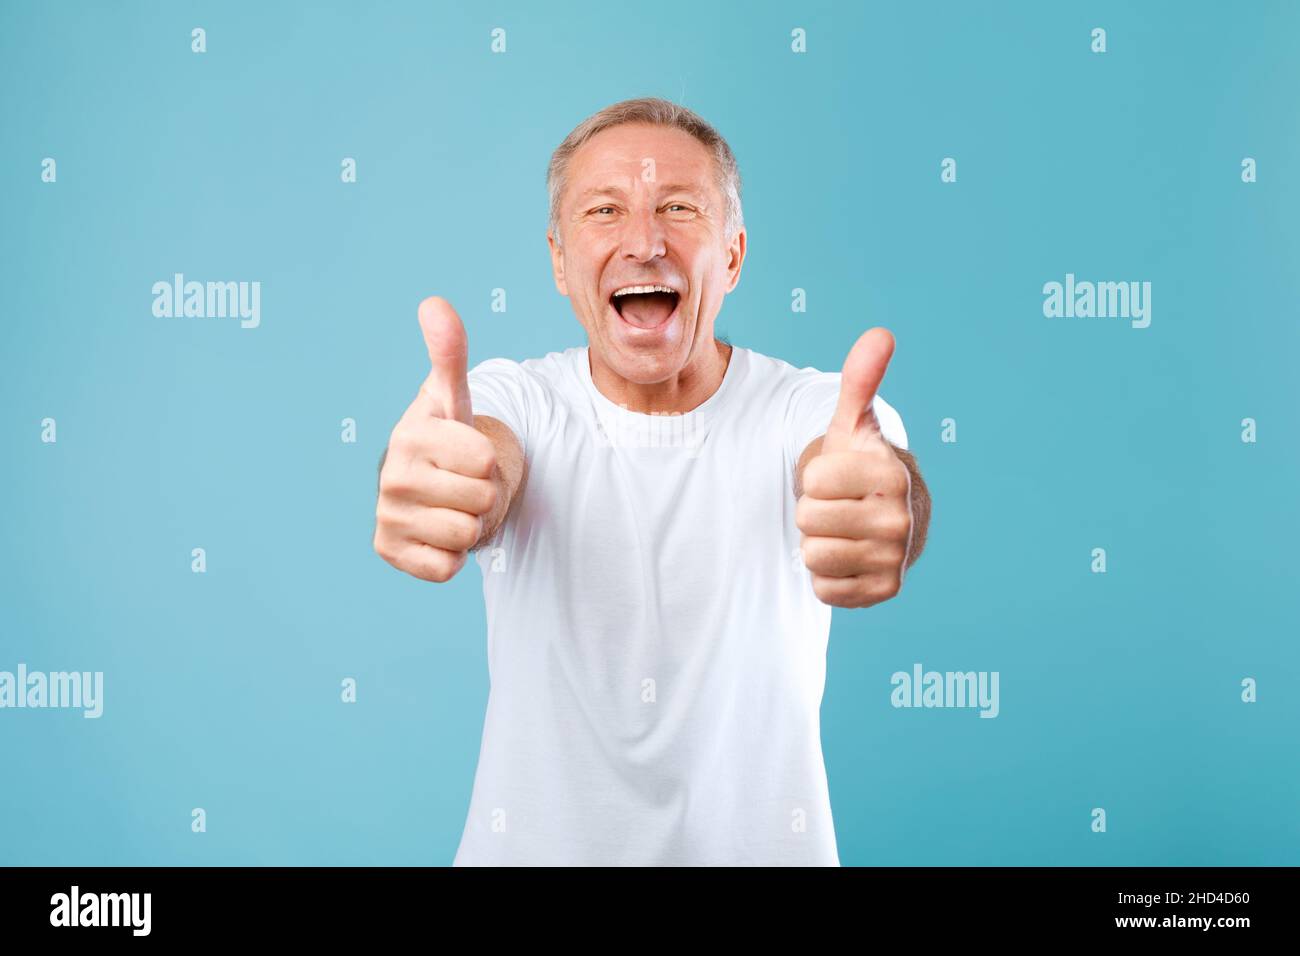 Excited mature man gesturing thumbs up and smiling Stock Photo